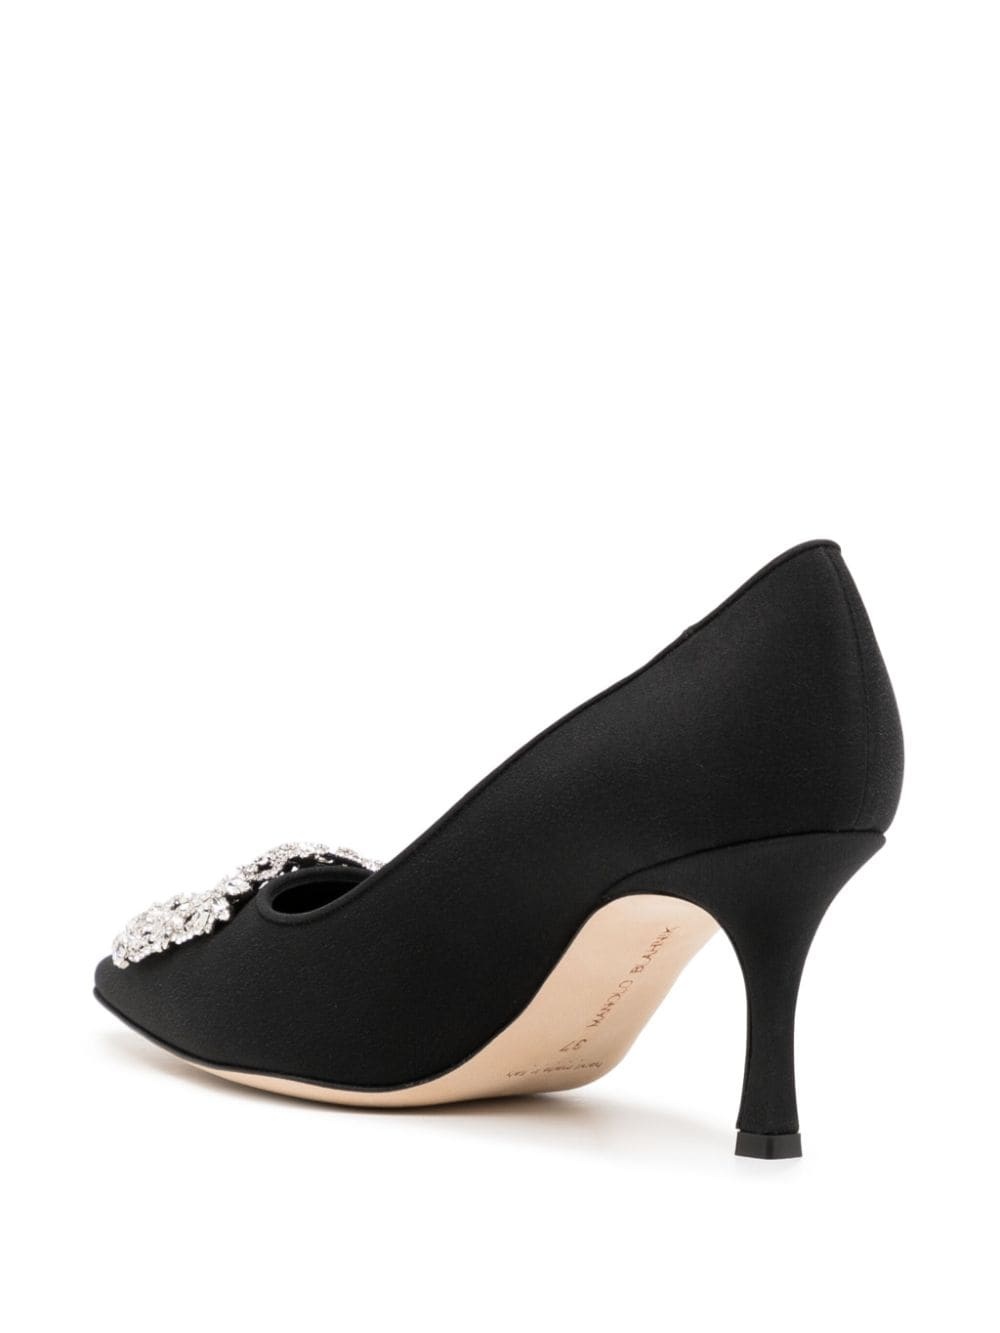 Hangisi 70mm leather pumps - 3